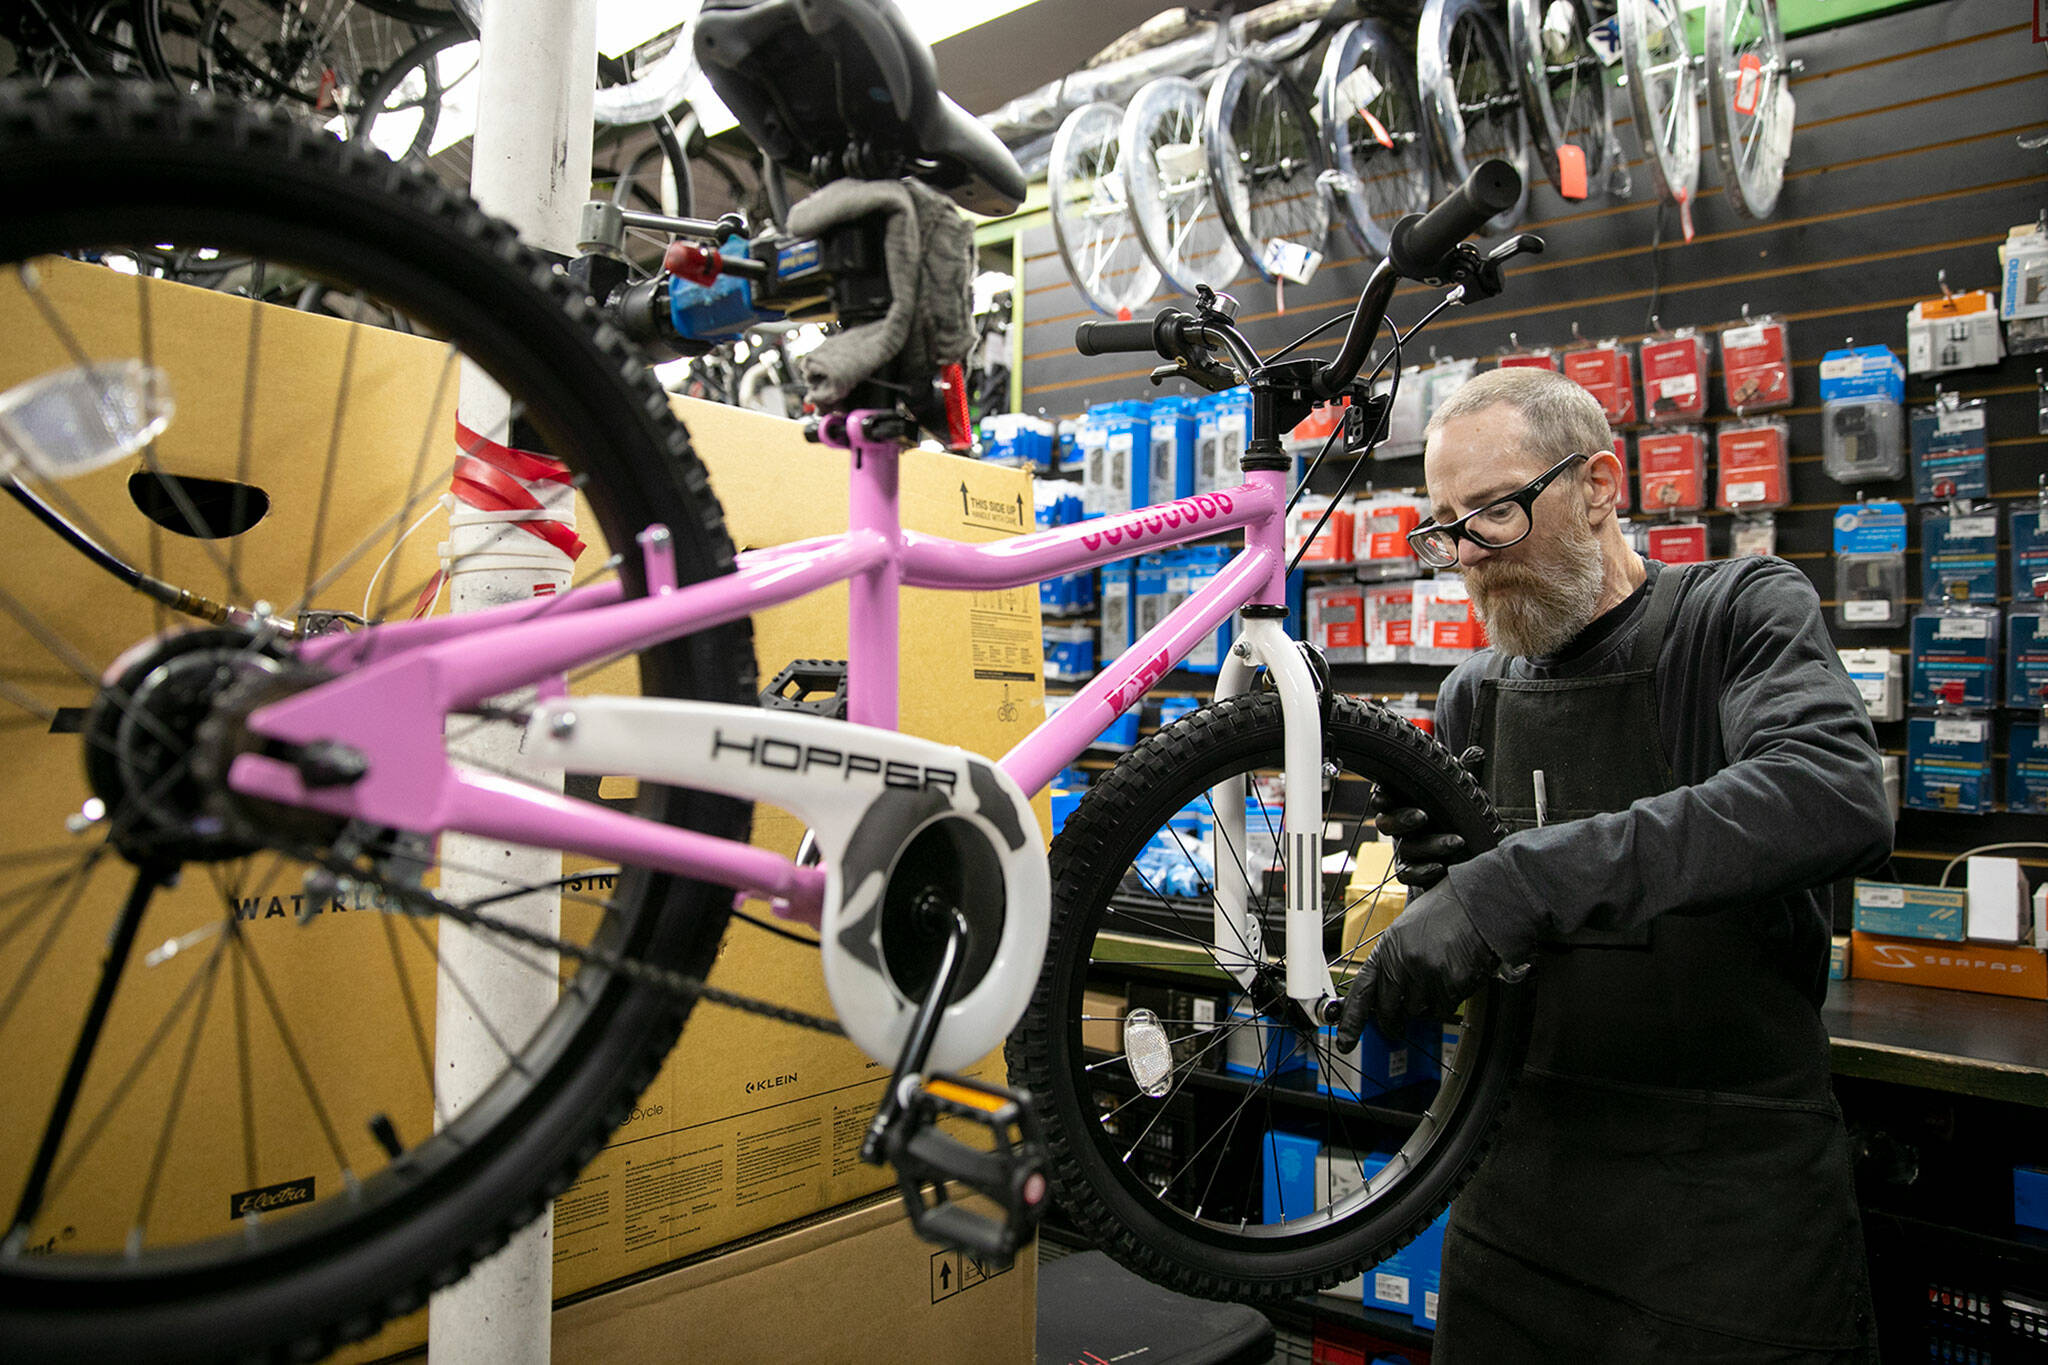 Mechanic Ron Bishop wrenches on a children’s bike while working Thursday, Sep. 1, 2022, at Bicycle Centres of Silverlake in Everett, Washington. (Ryan Berry / The Herald)